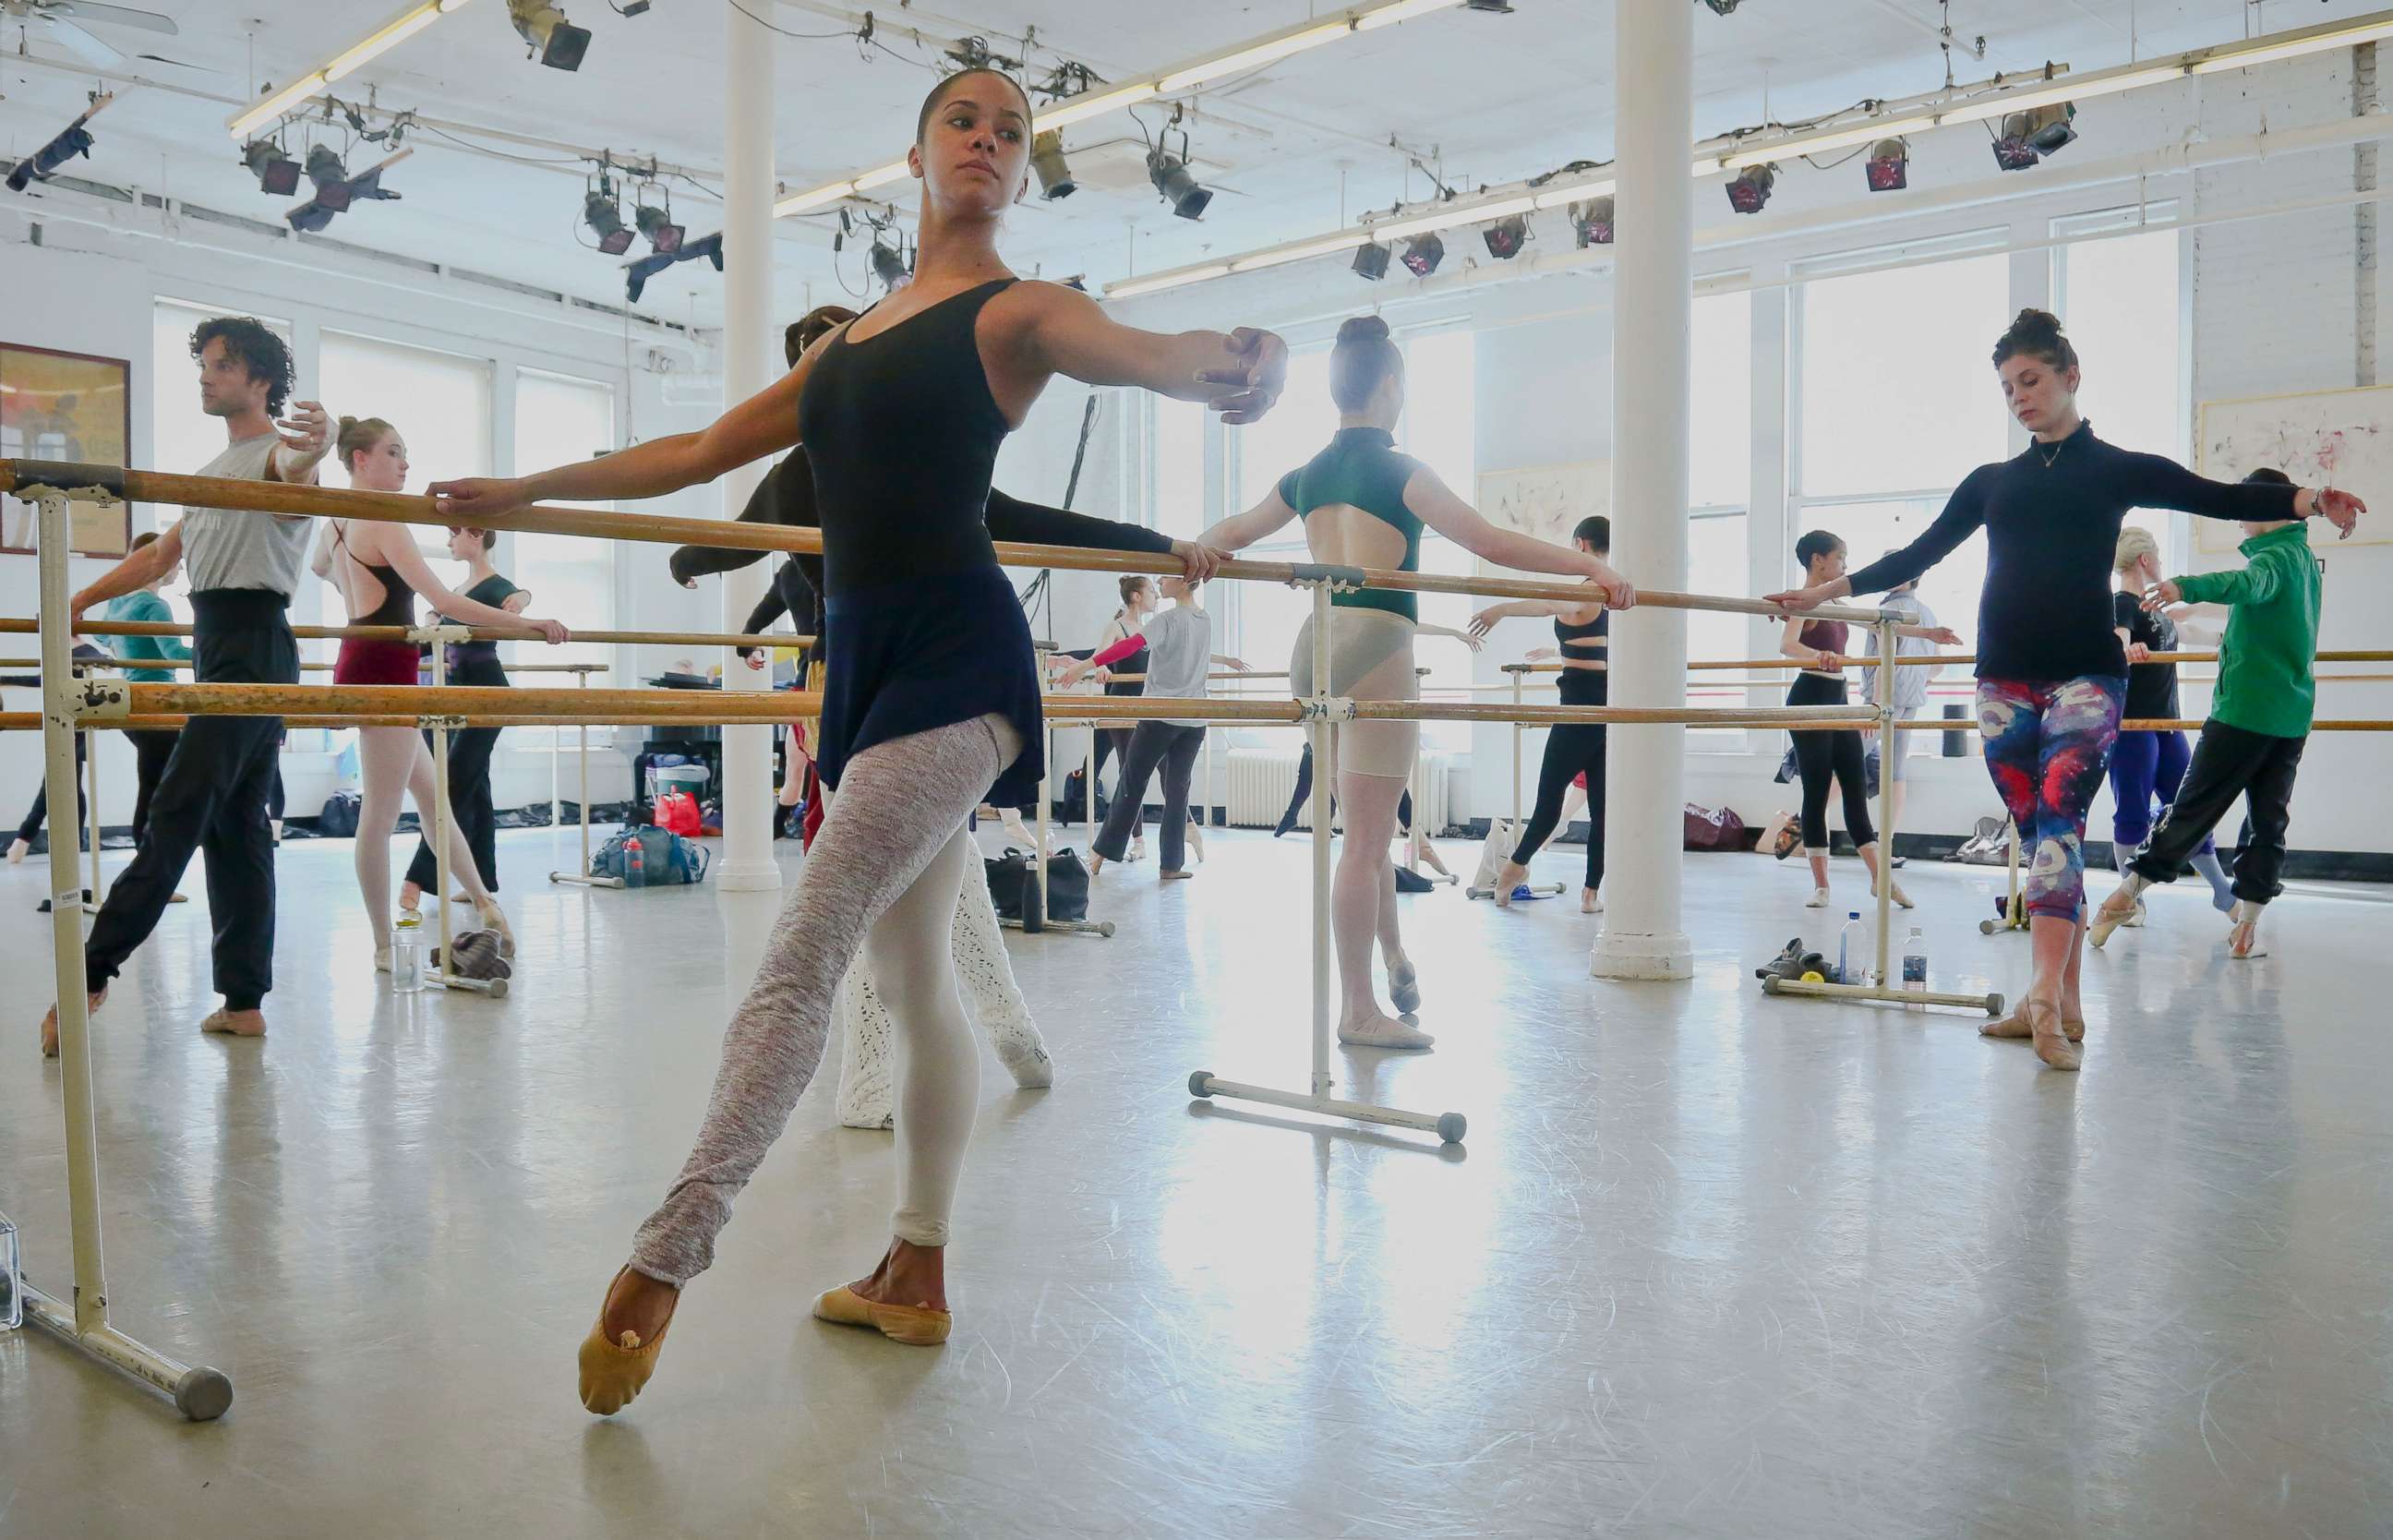 PHOTO: Misty Copeland, first African-American female principal dancer with the American Ballet Theatre, appears at the Steps on Broadway dance school in New York, March 21, 2017.